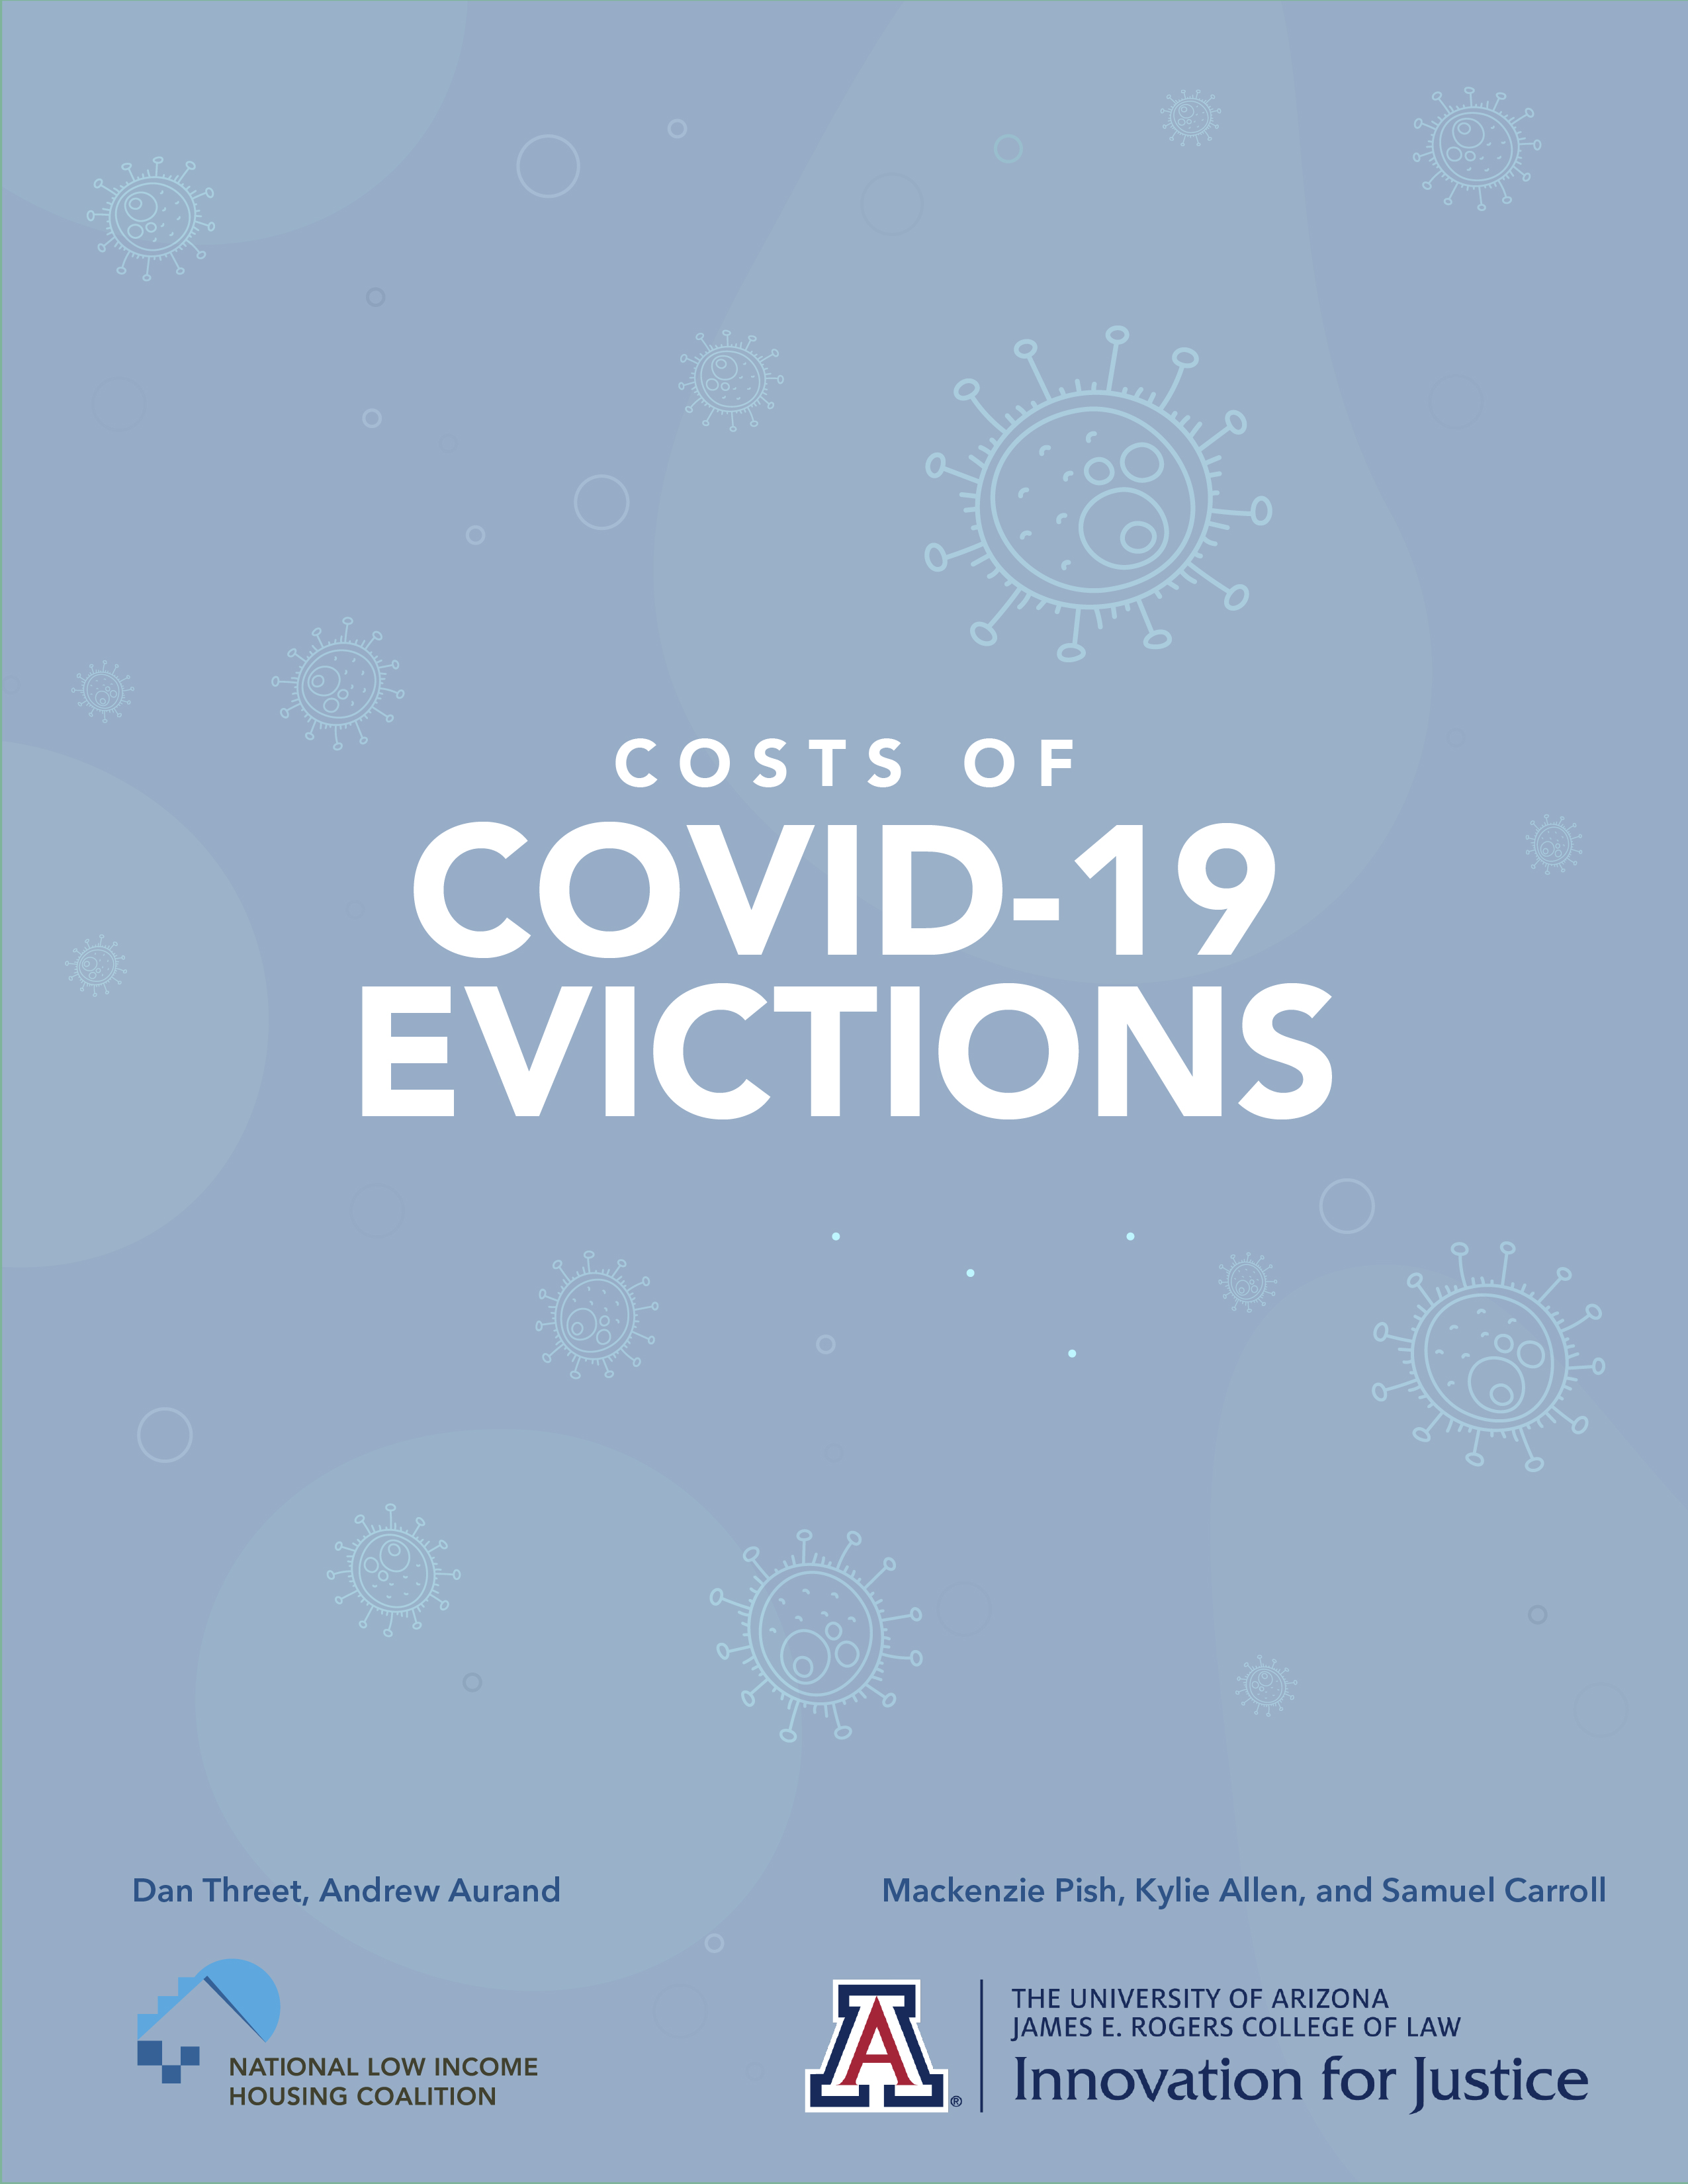 Costs Associated with Eviction-Related Homelessness